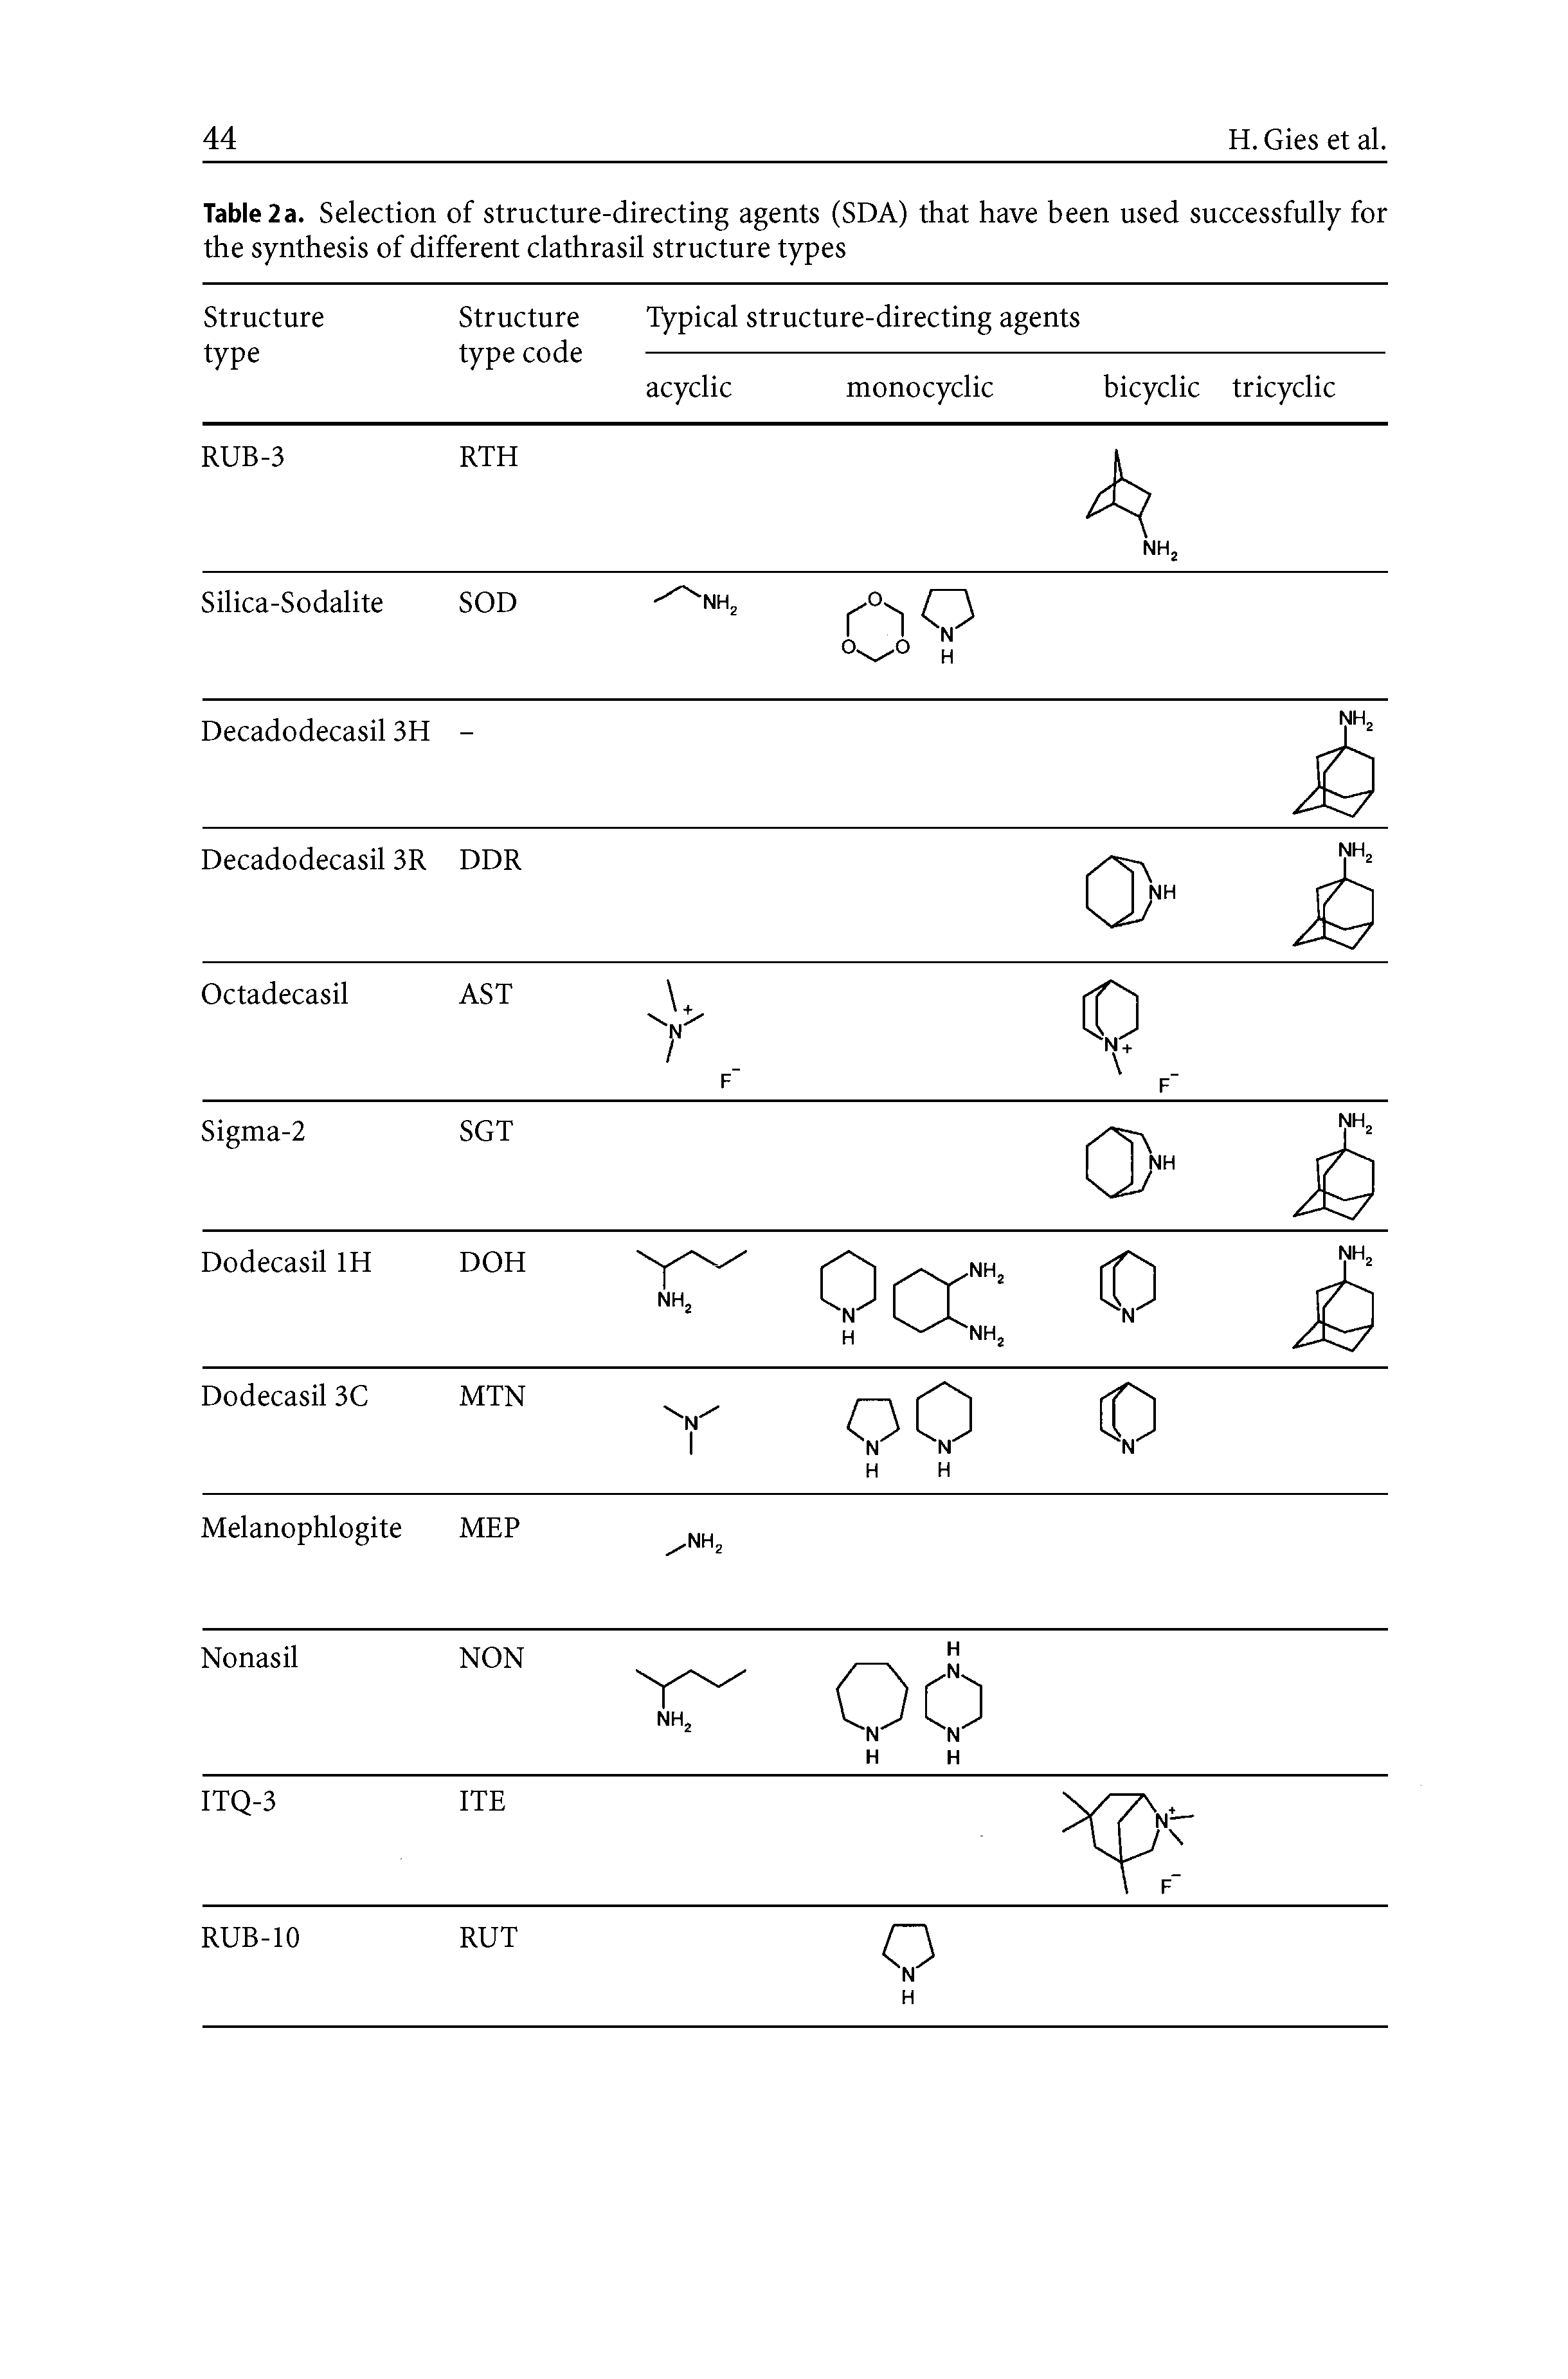 Table 2a. Selection of structure-directing agents (SDA) that have been used successfully for the synthesis of different clathrasil structure types ...